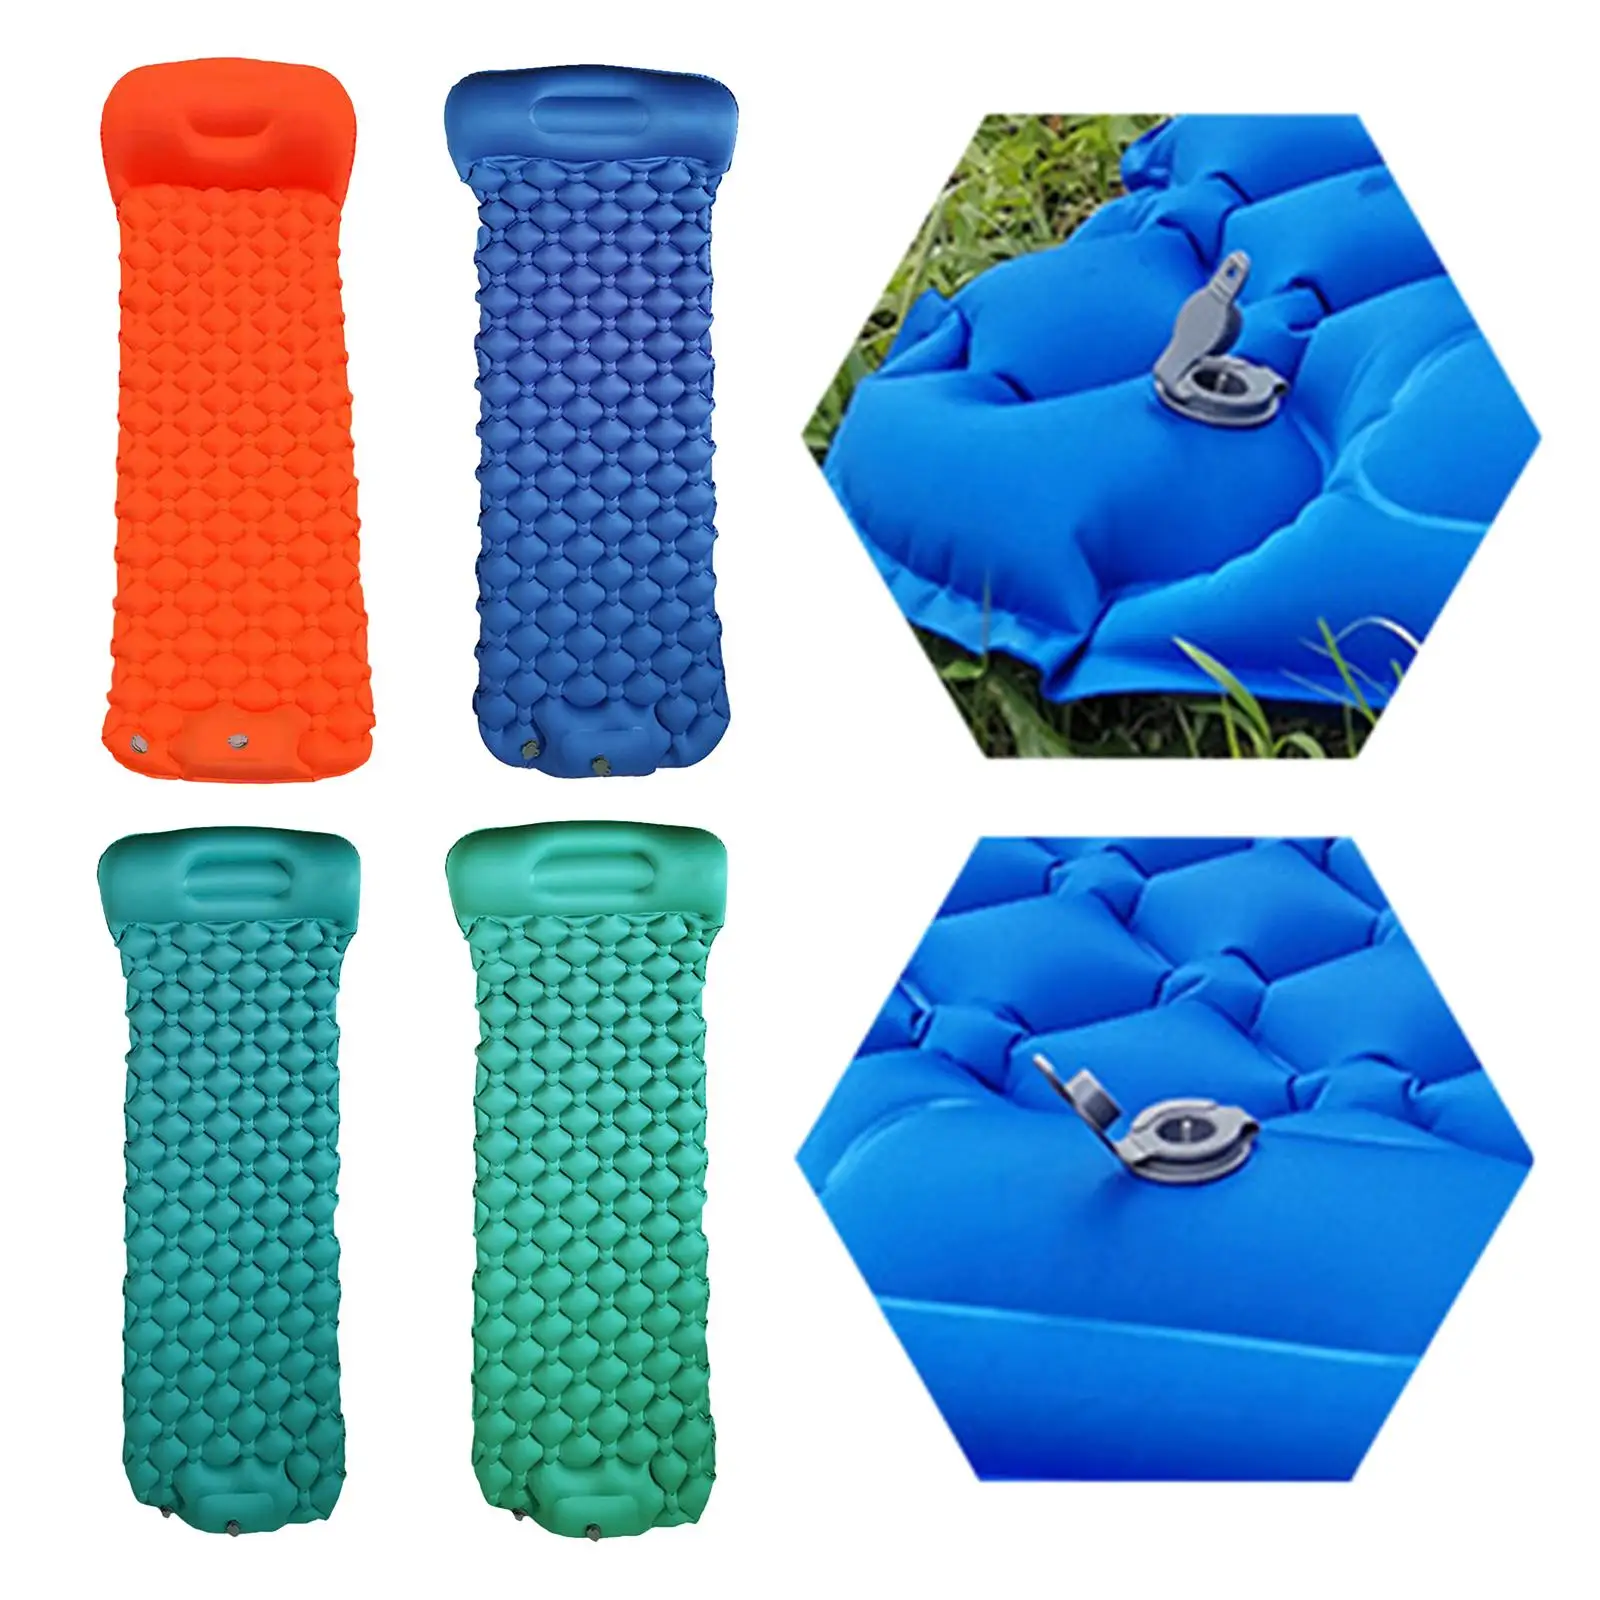 1 Person Sleeping Tent Pad Ultralight Inflatable Double Sleeping Mat,  for Camping, Backpacking, Hiking Lightweight  Mattress